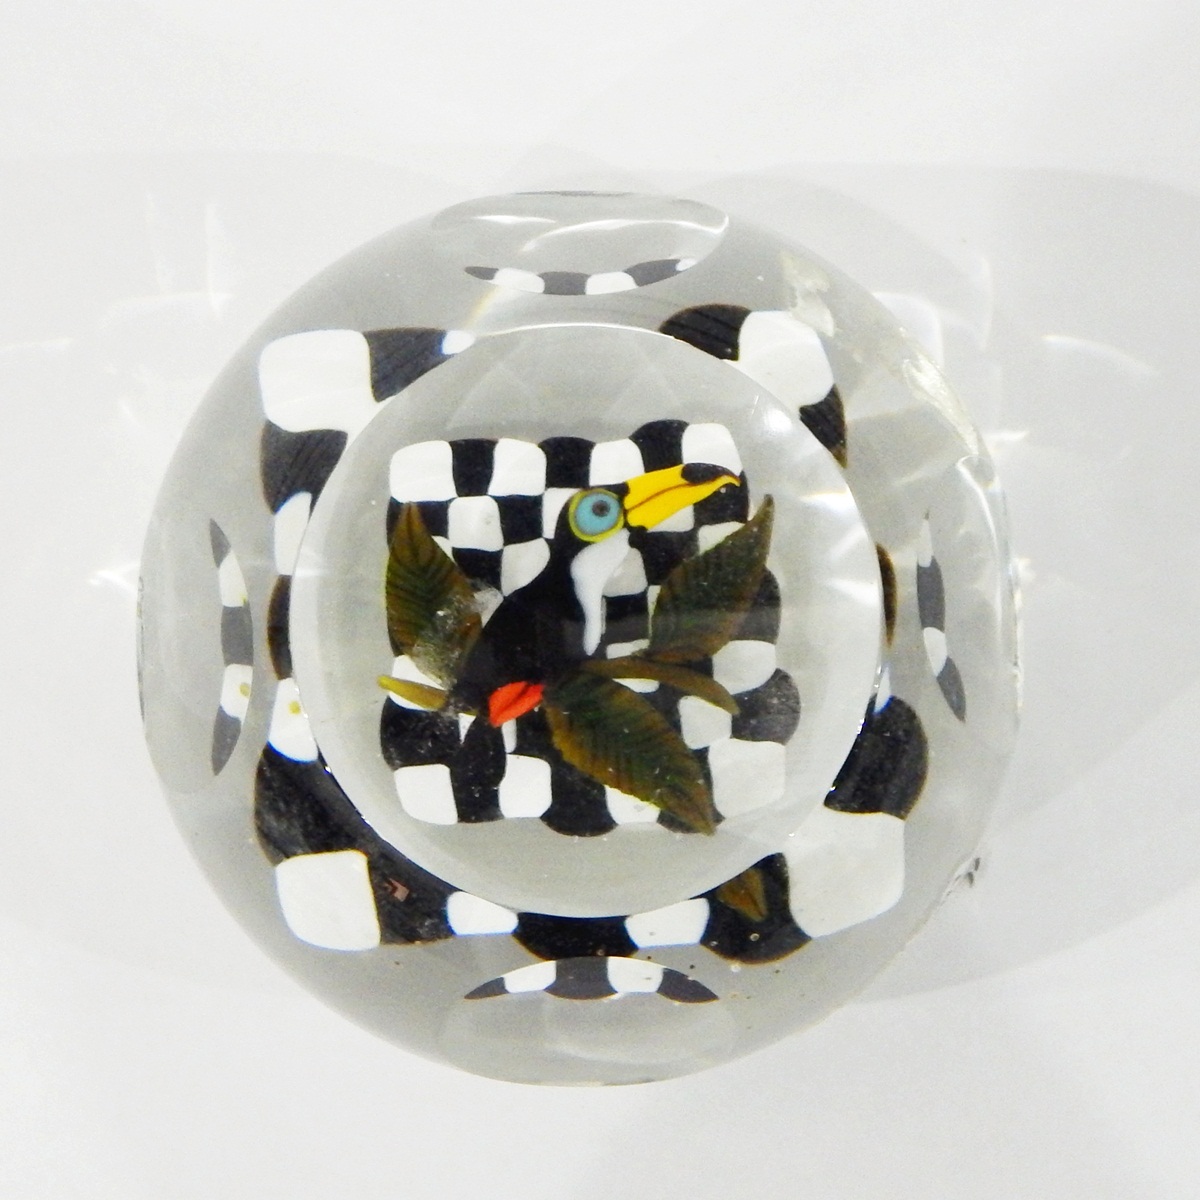 John Deacons clear glass cushion paperweight with faceted windows, - Image 3 of 3